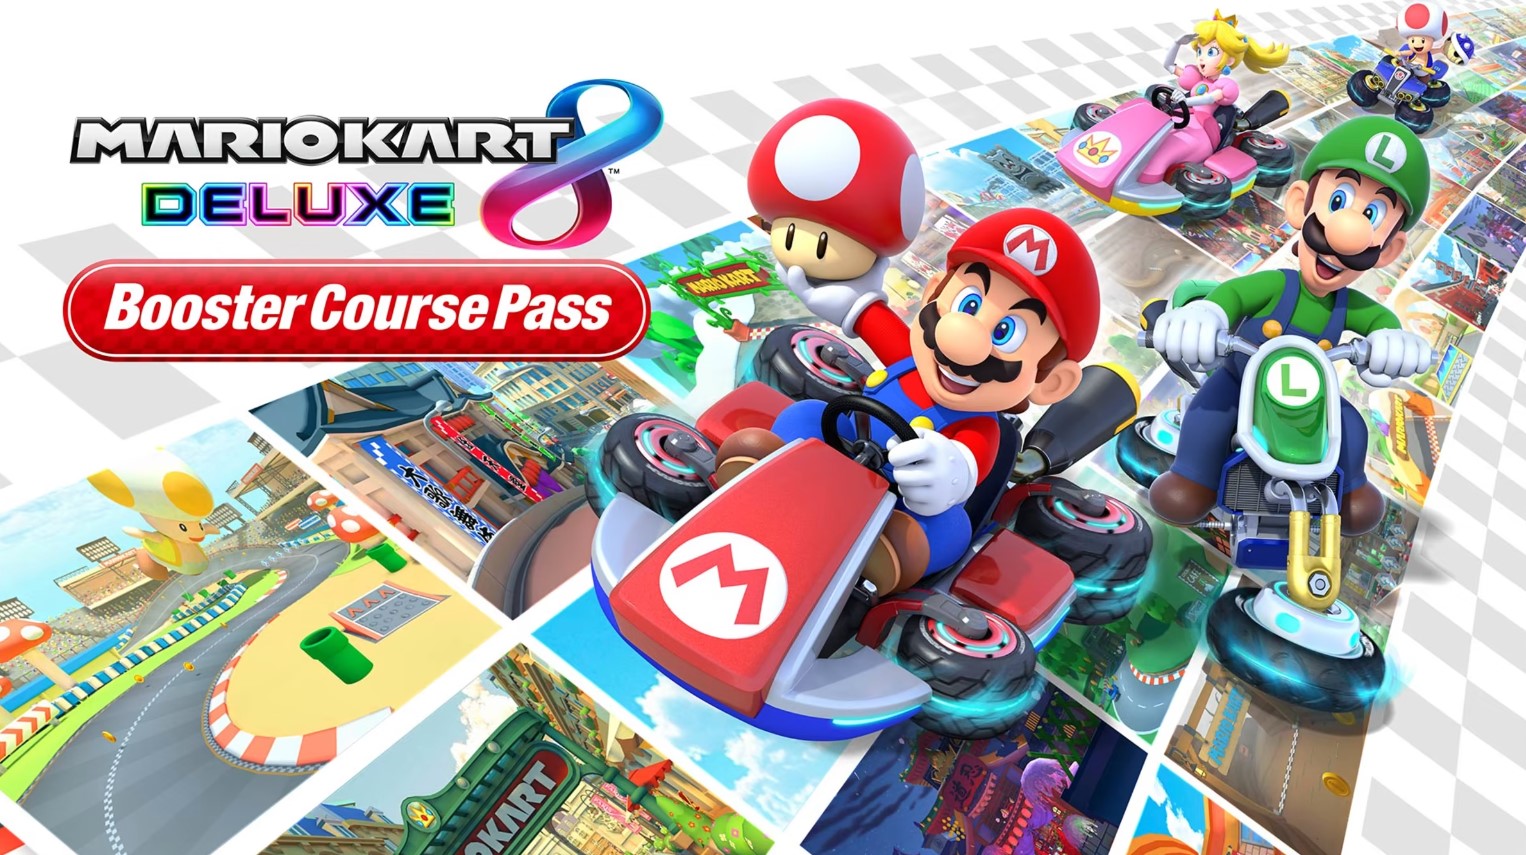 Mario Kart 8 Deluxe - Booster Course Pass (DLC) (Switch)